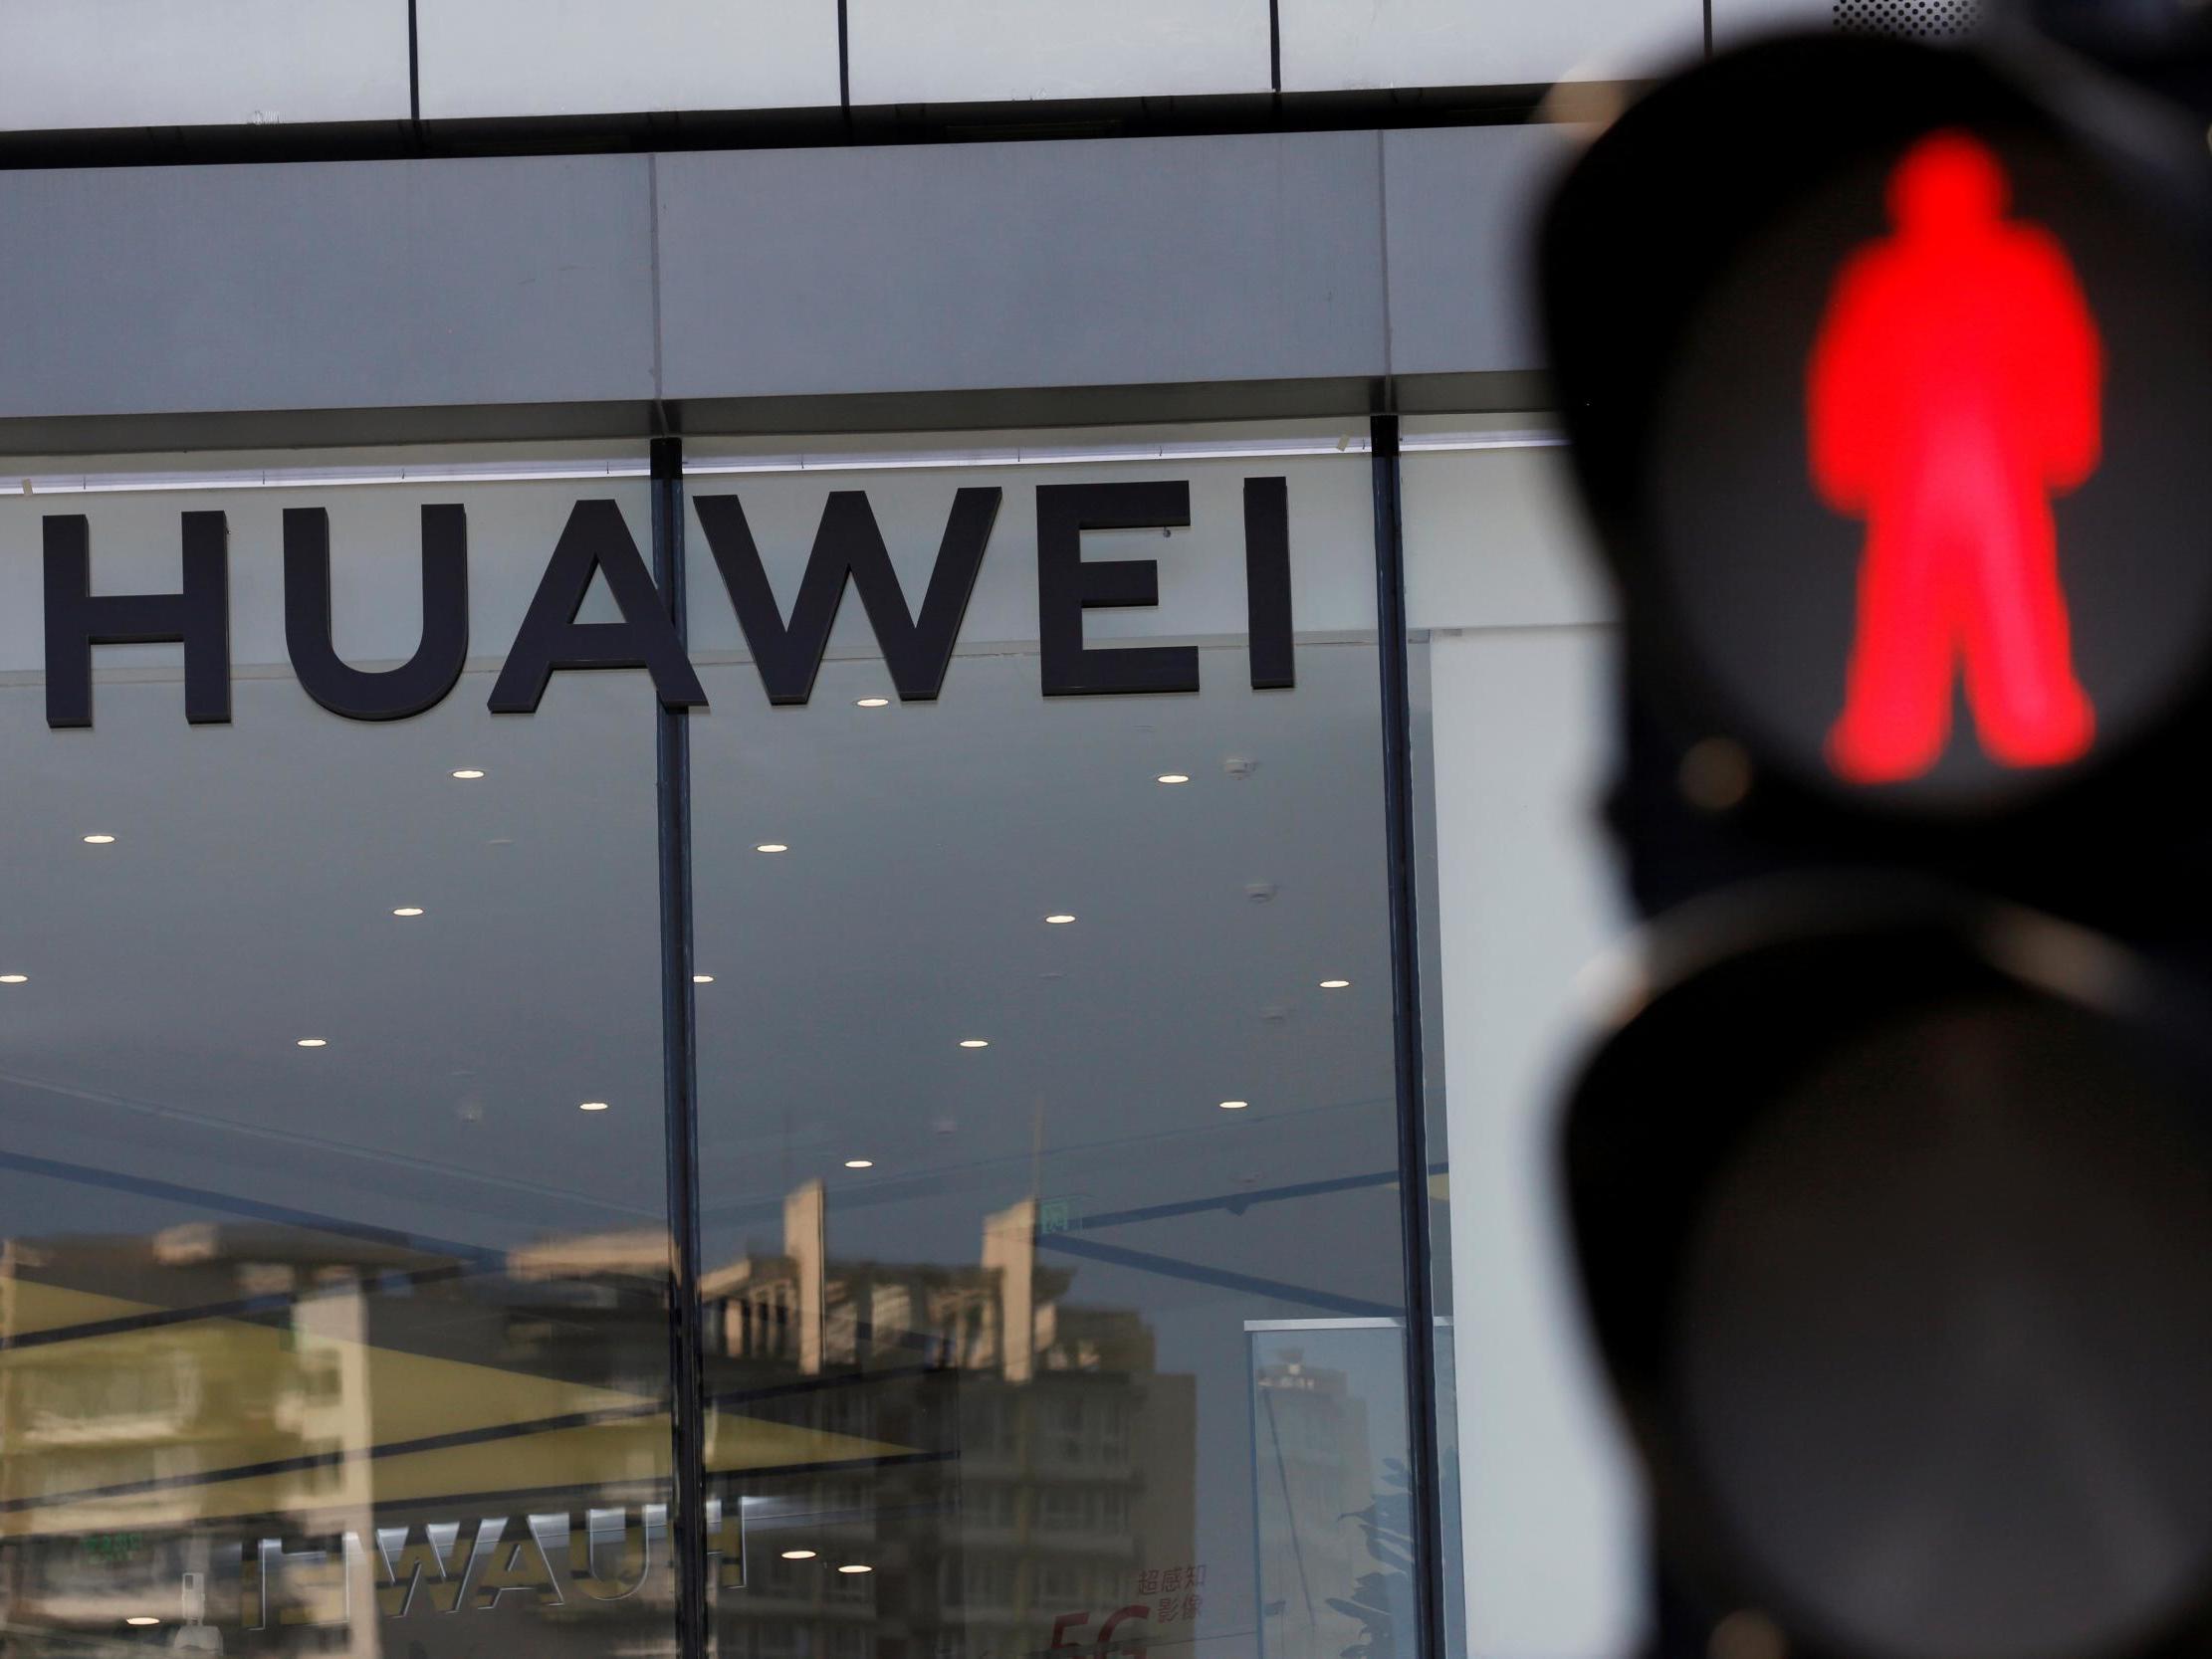 After the Huawei ban, it’s time to ask – do we really need 5G after all?